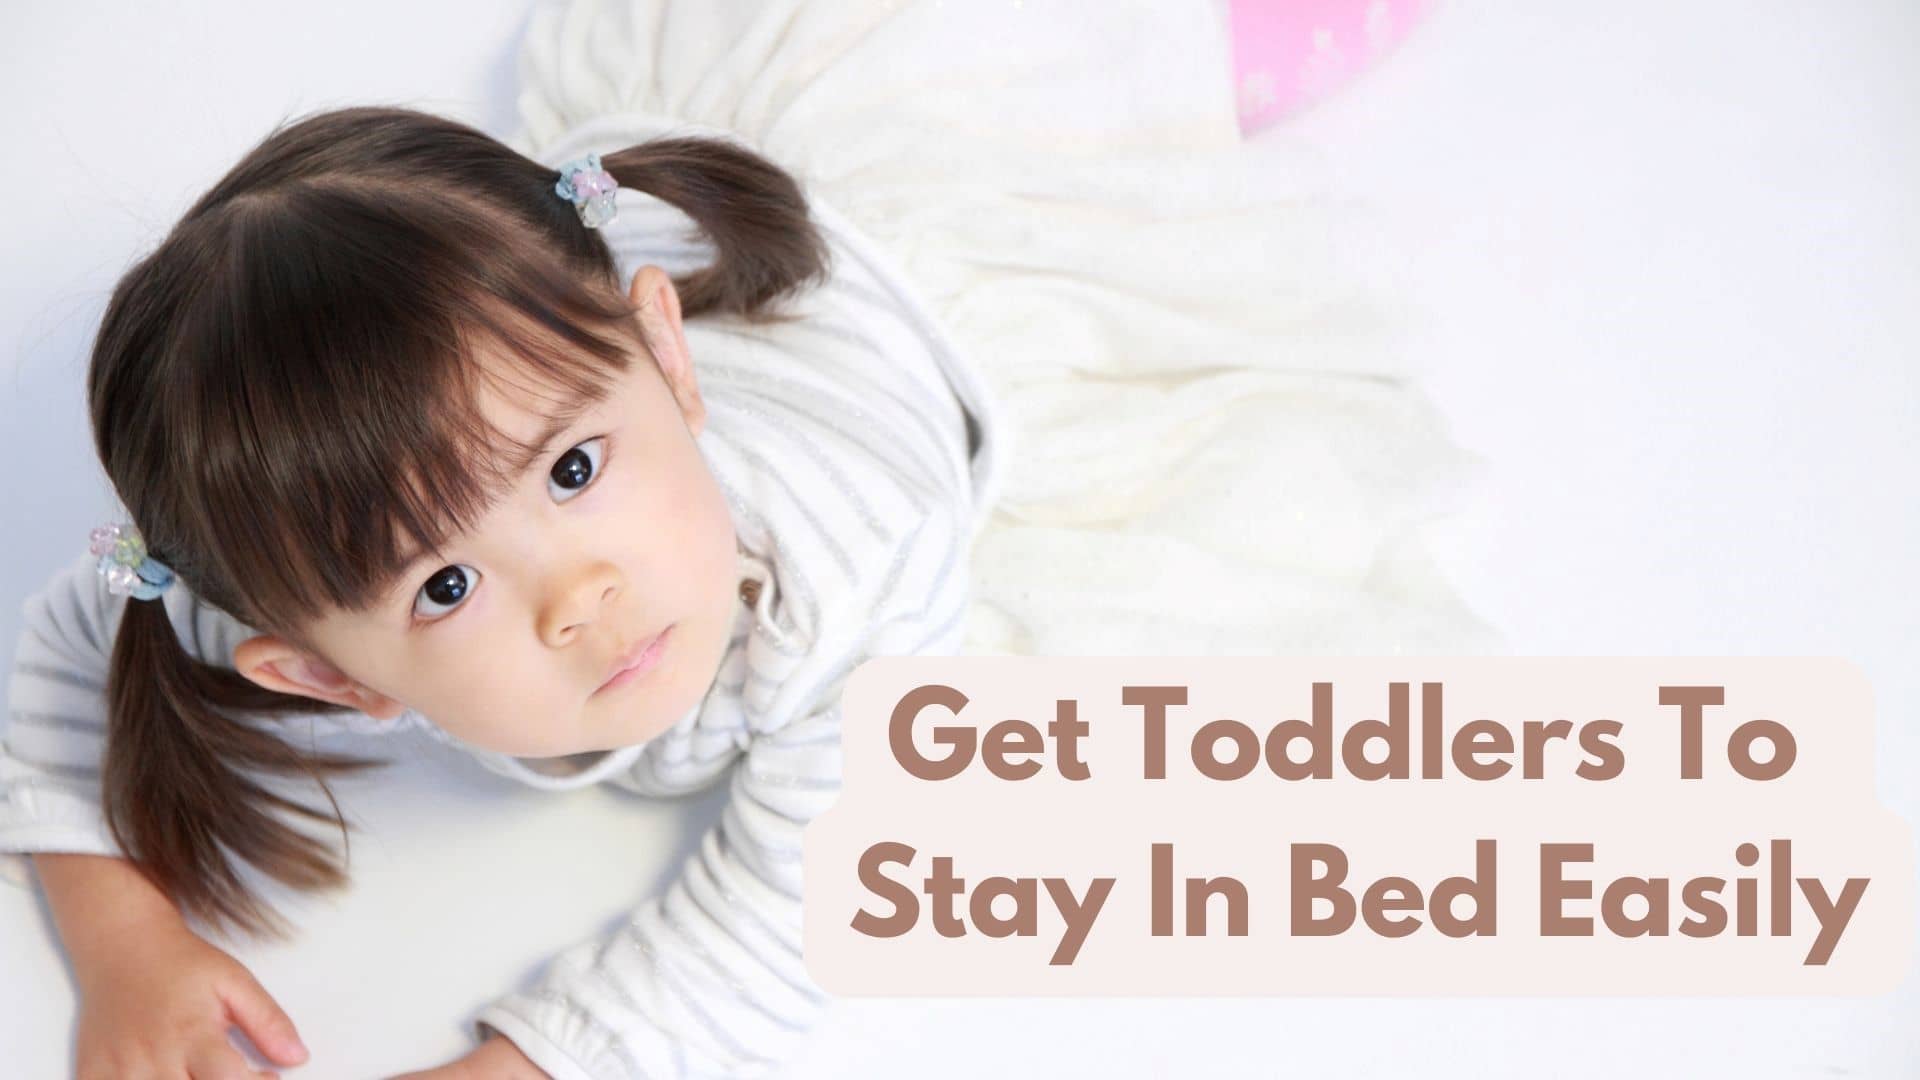 How To Get Toddlers To Stay In Bed Easily?